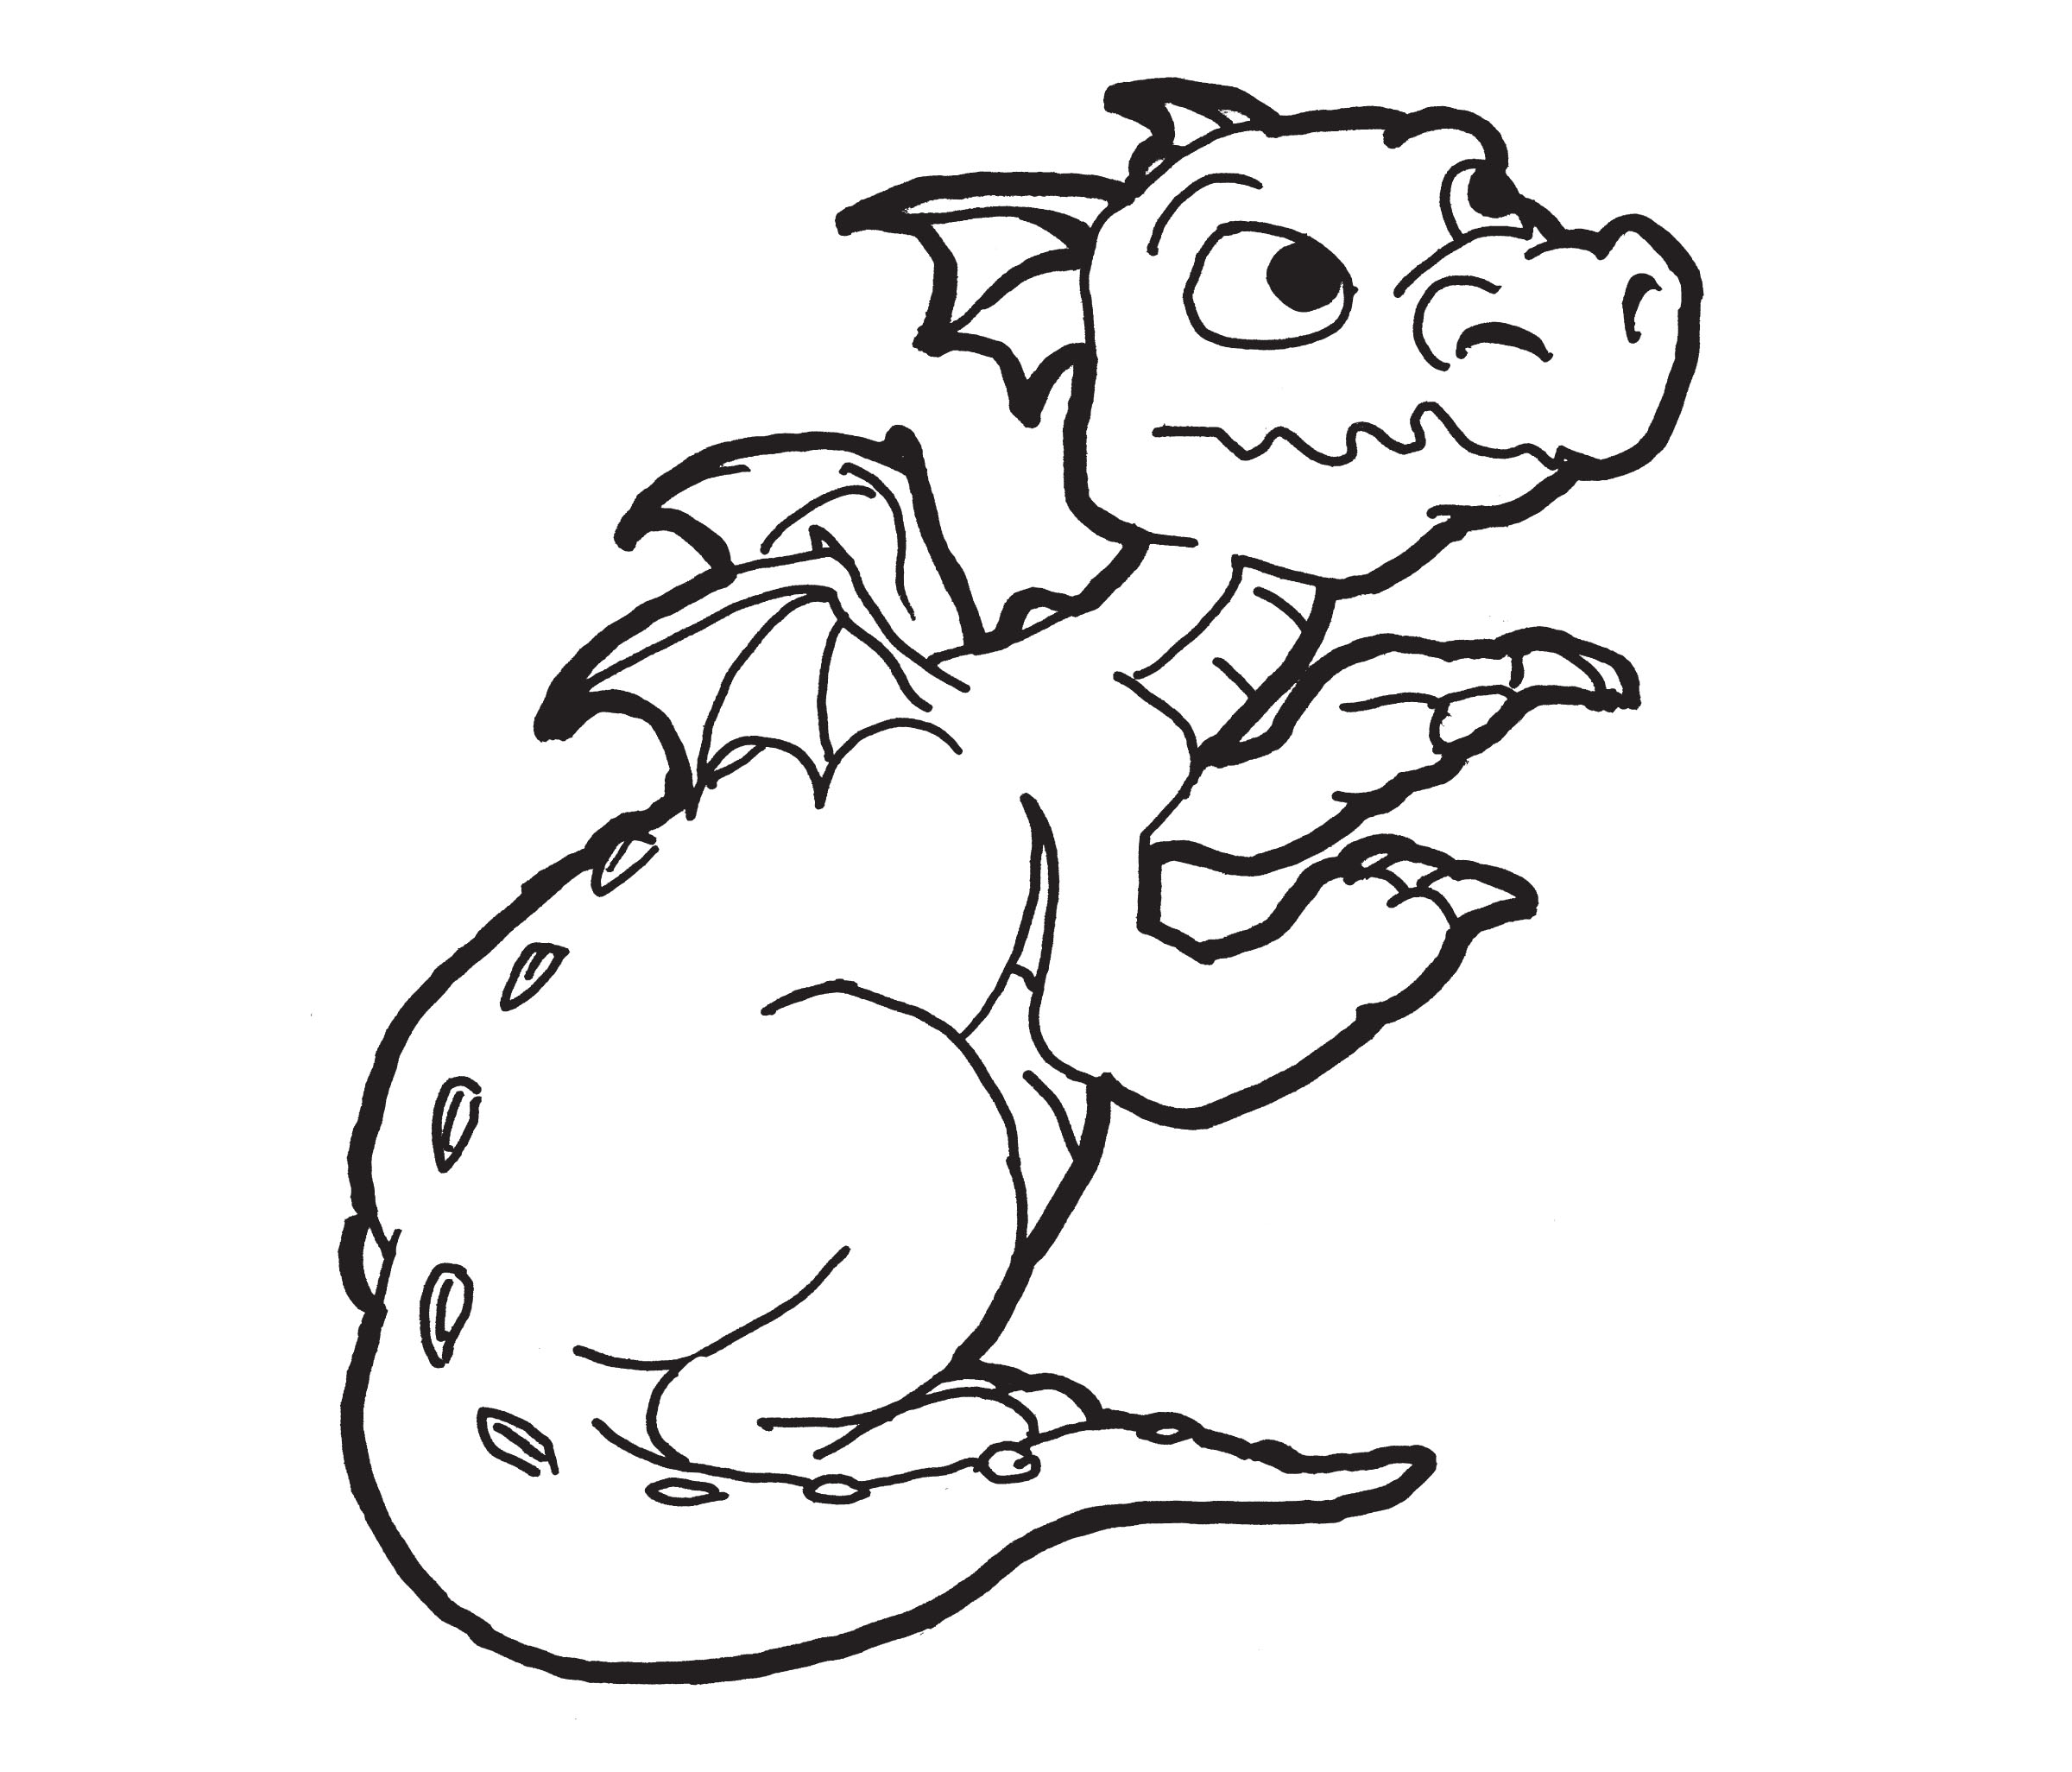 The Dragon & the Turtle: Coloring Pages